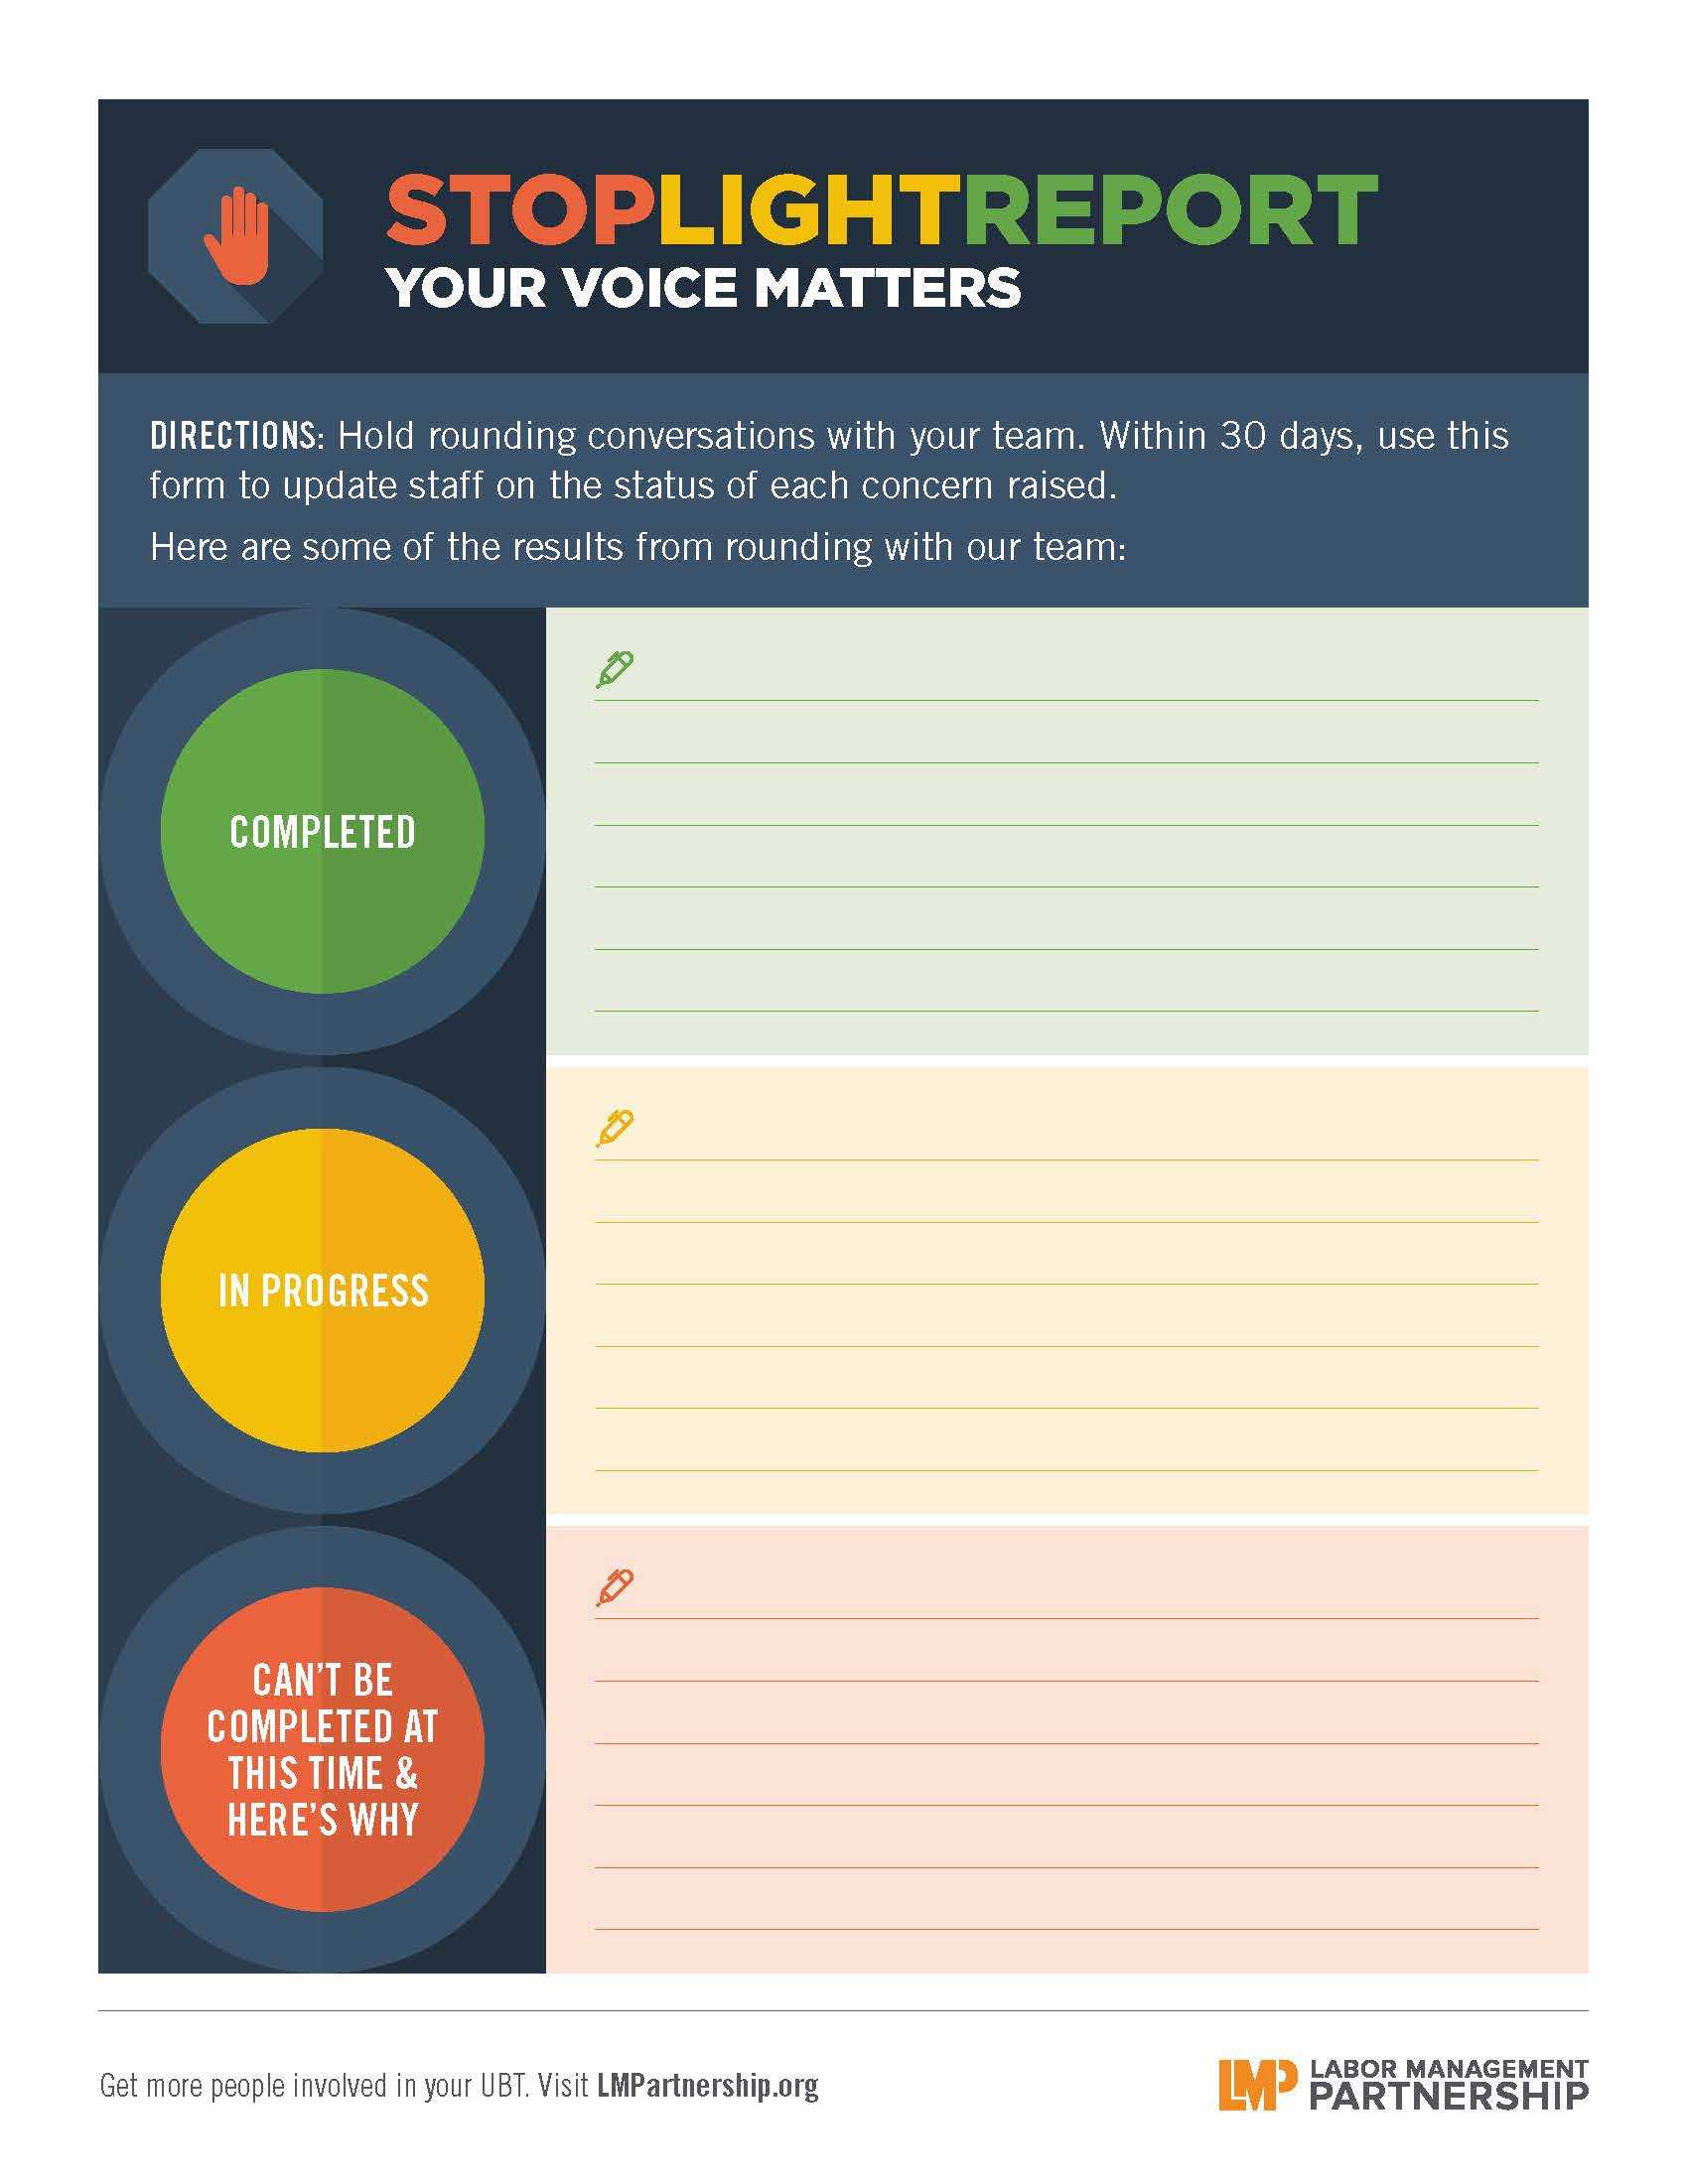 Stoplight Report: Your Voice Matters | Labor Management With Stoplight Report Template